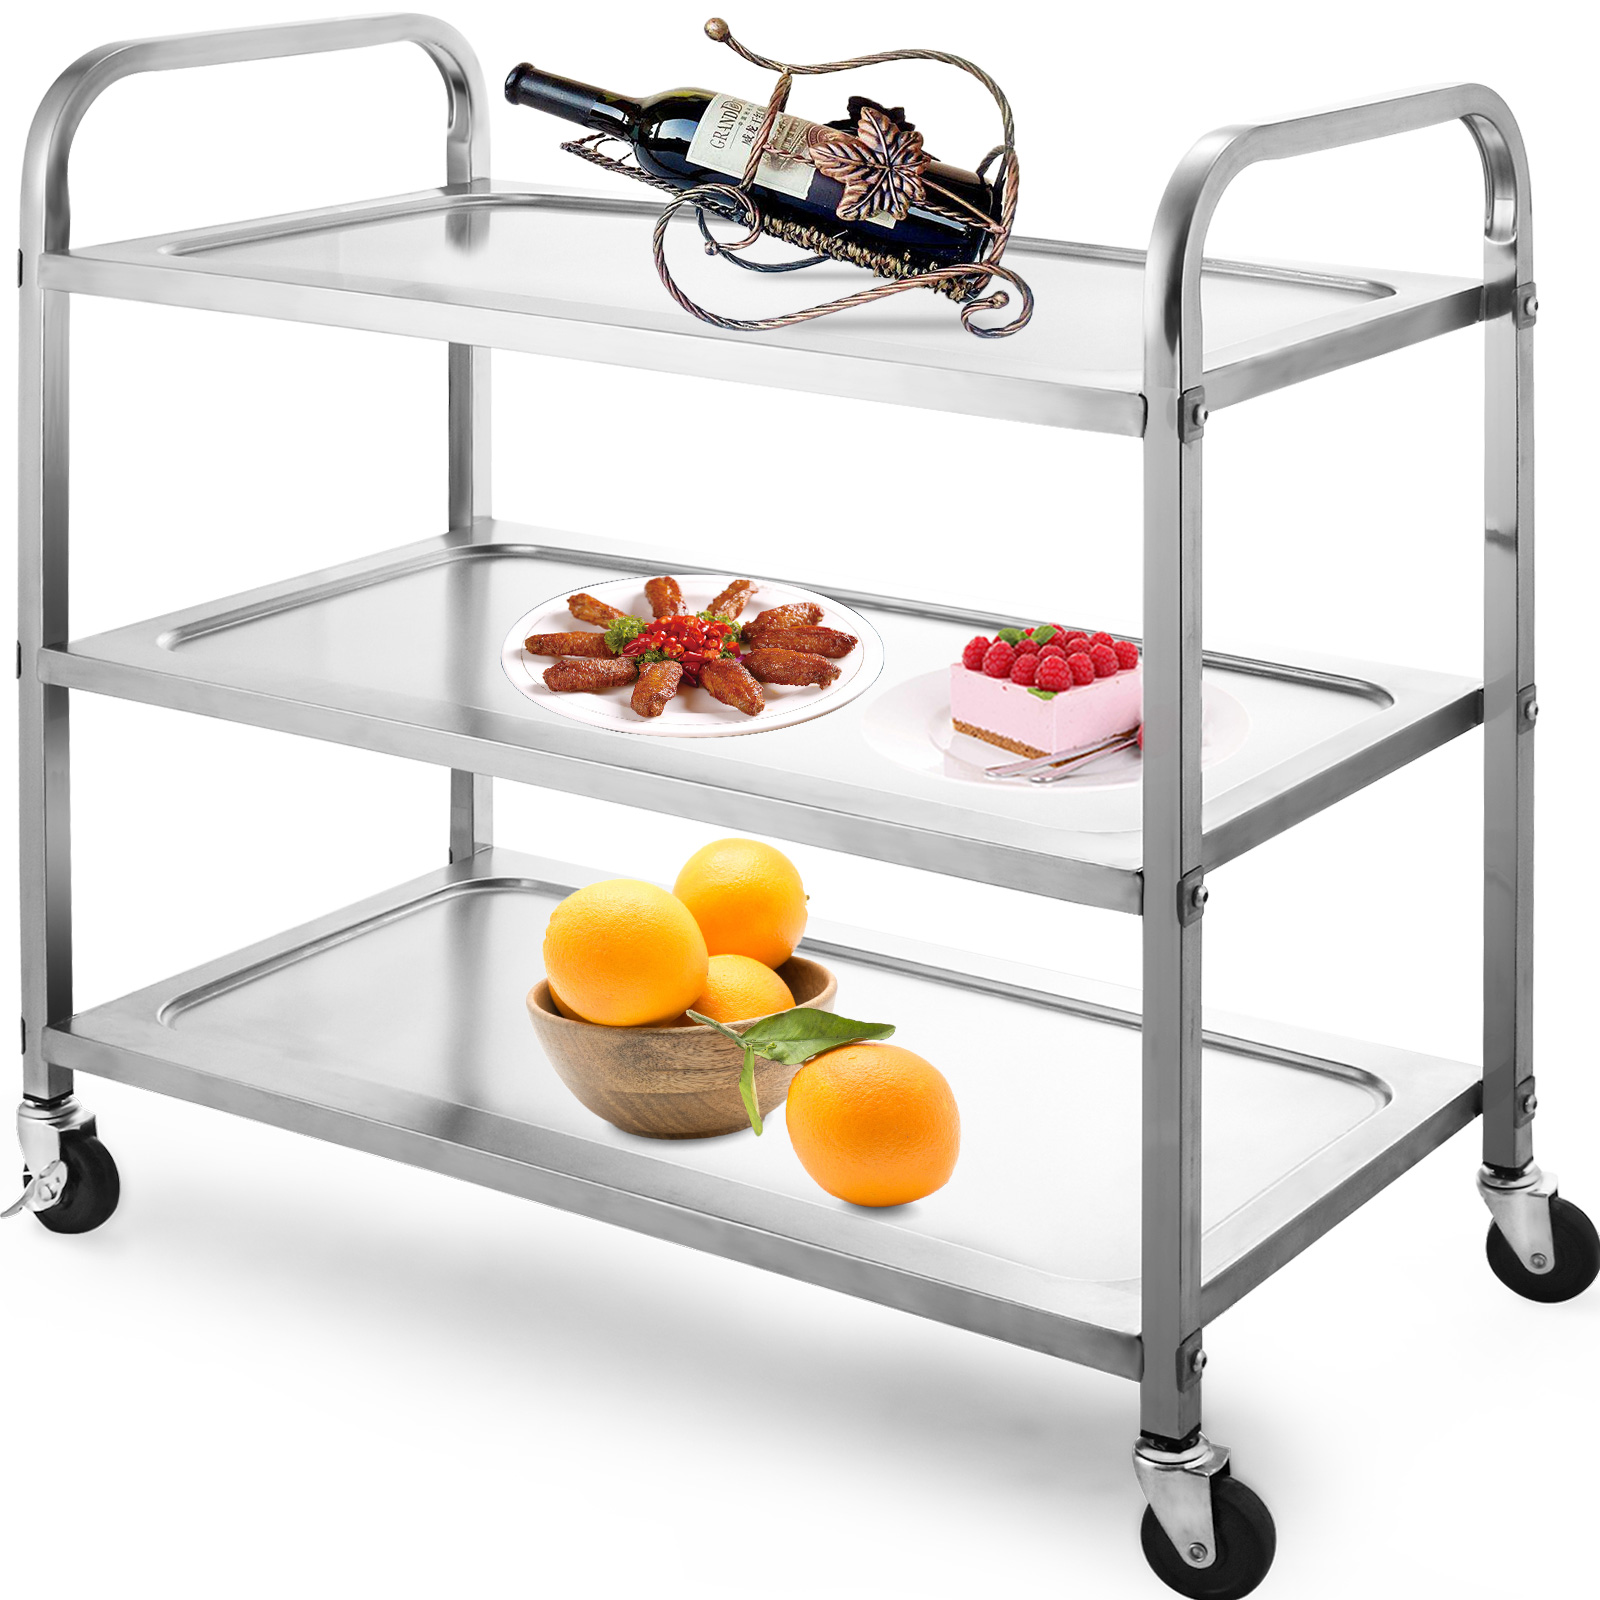 Commercial Bus Cart Kitchen Food Catering Rolling Dolly 3 Shelf Stainless Steel от Vevor Many GEOs